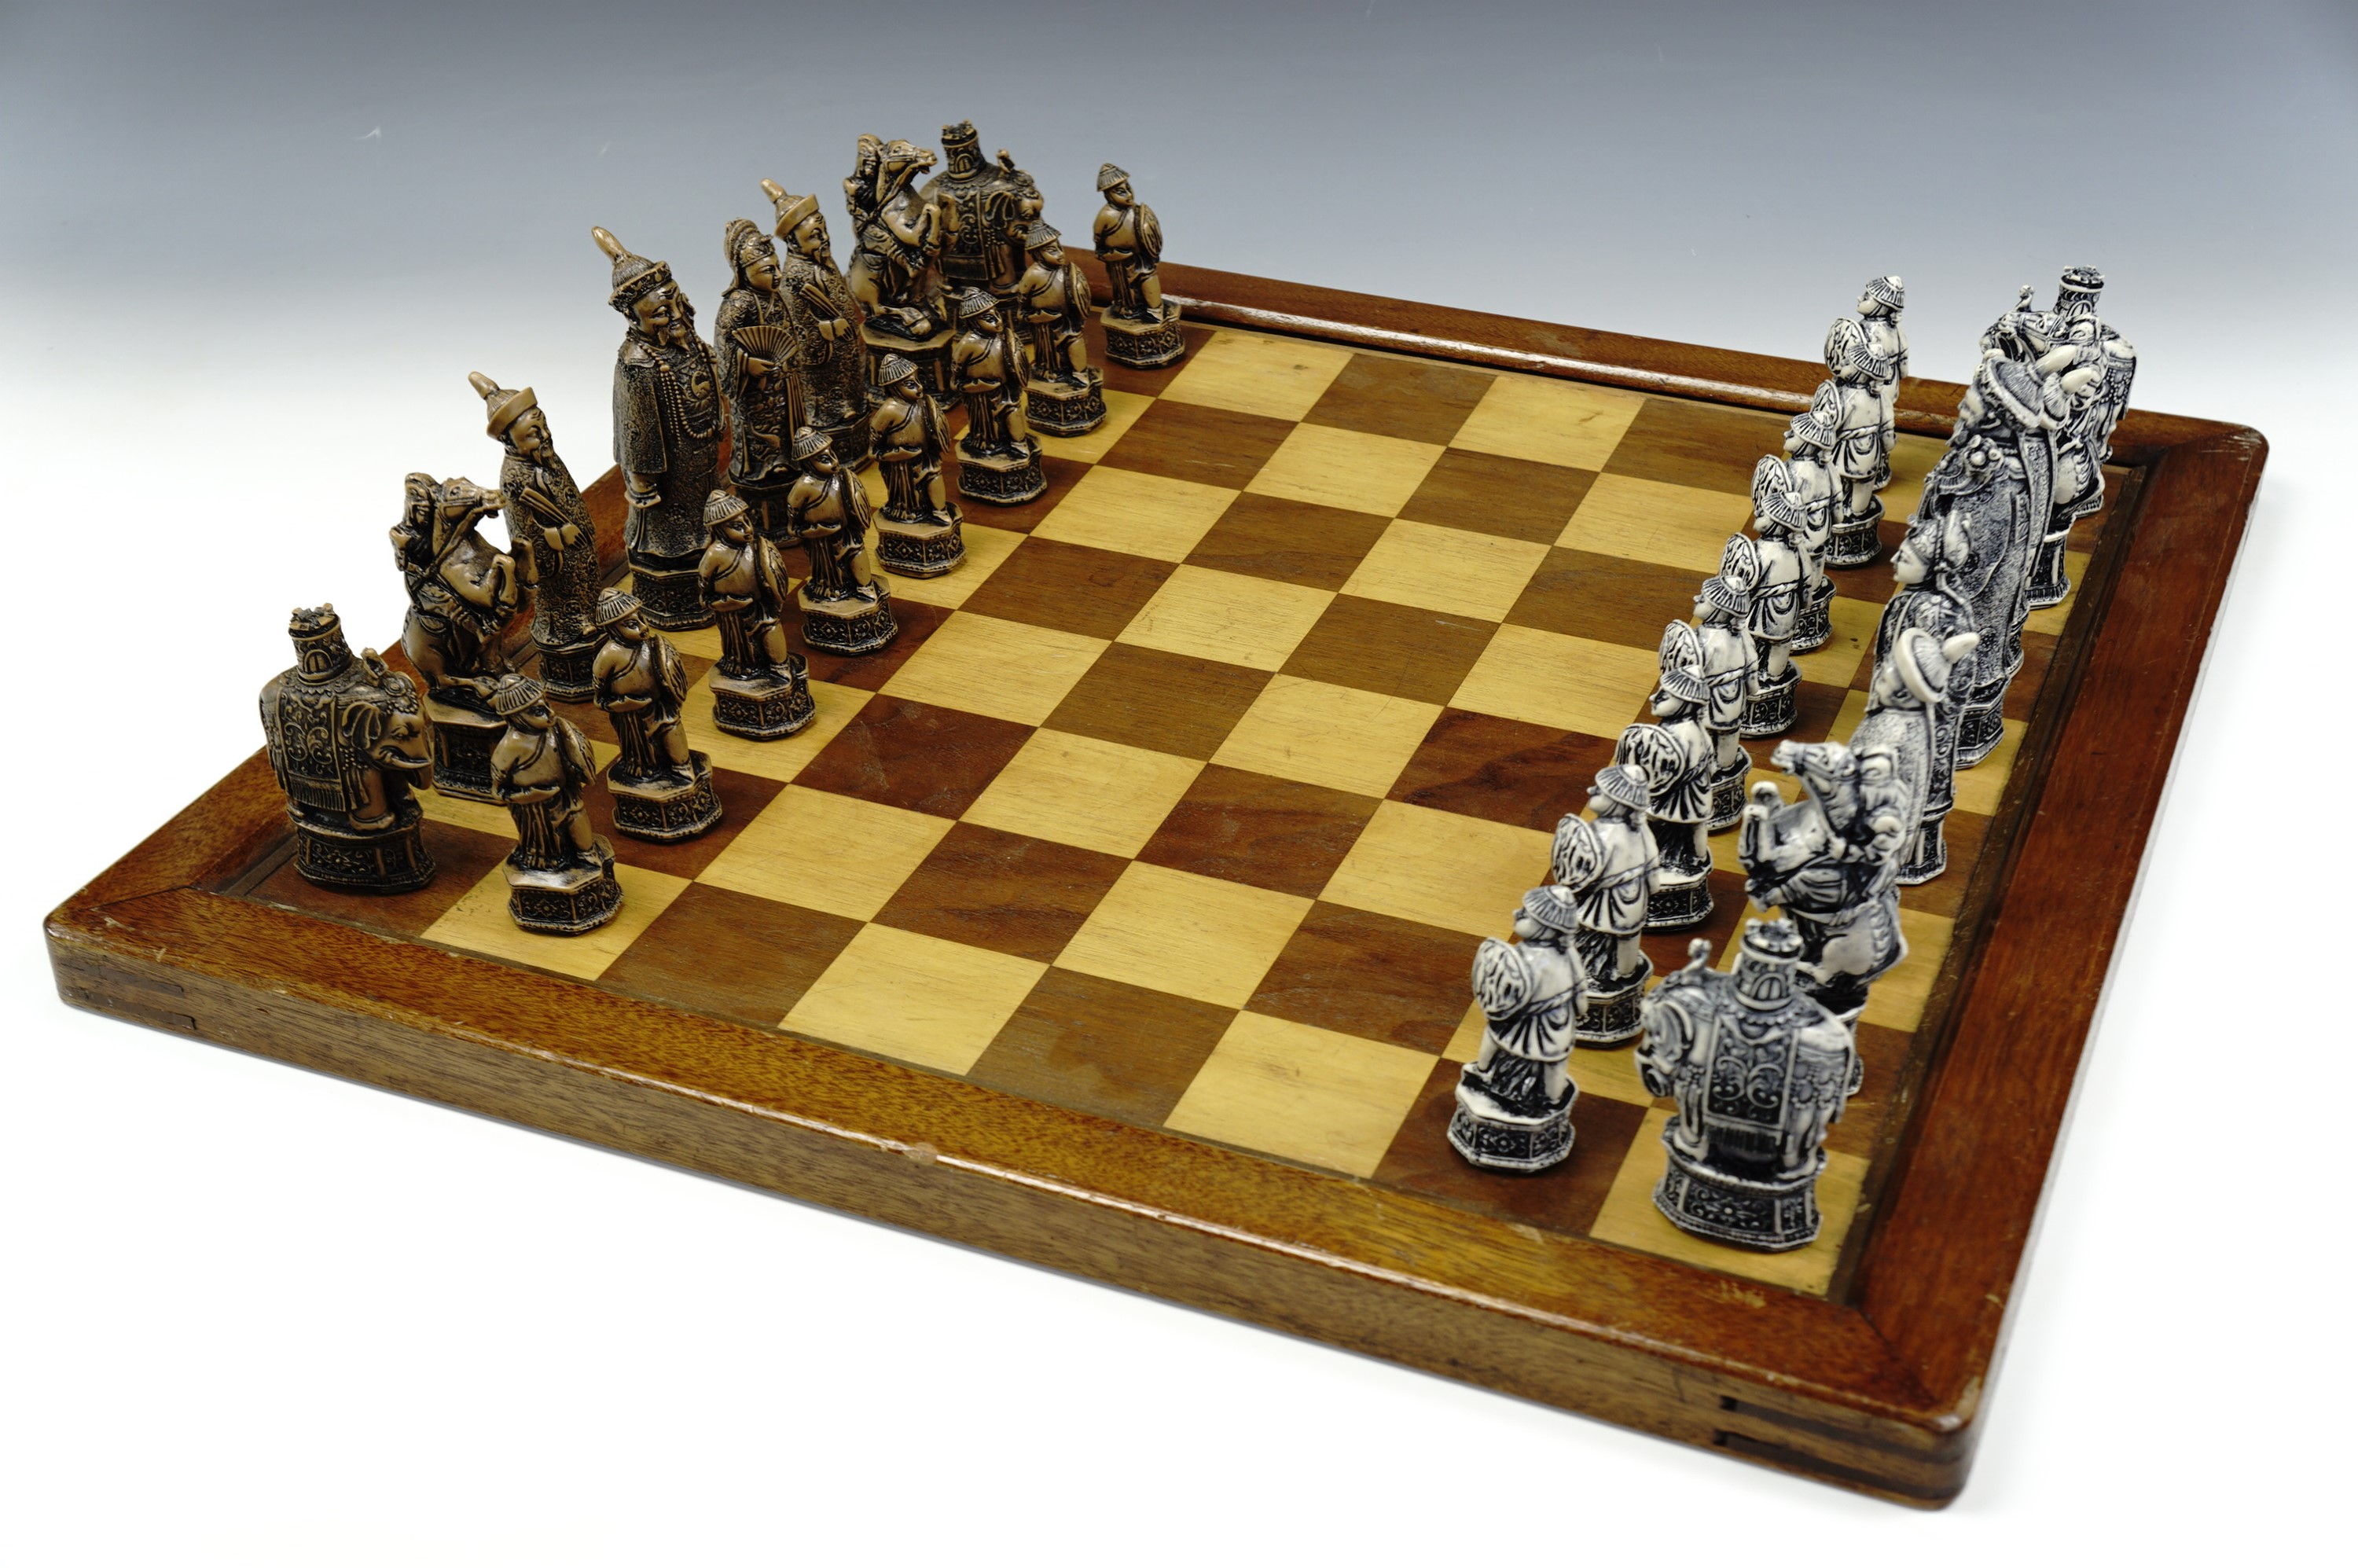 A resin Chinese figural chess set (king's 13 cm), with board